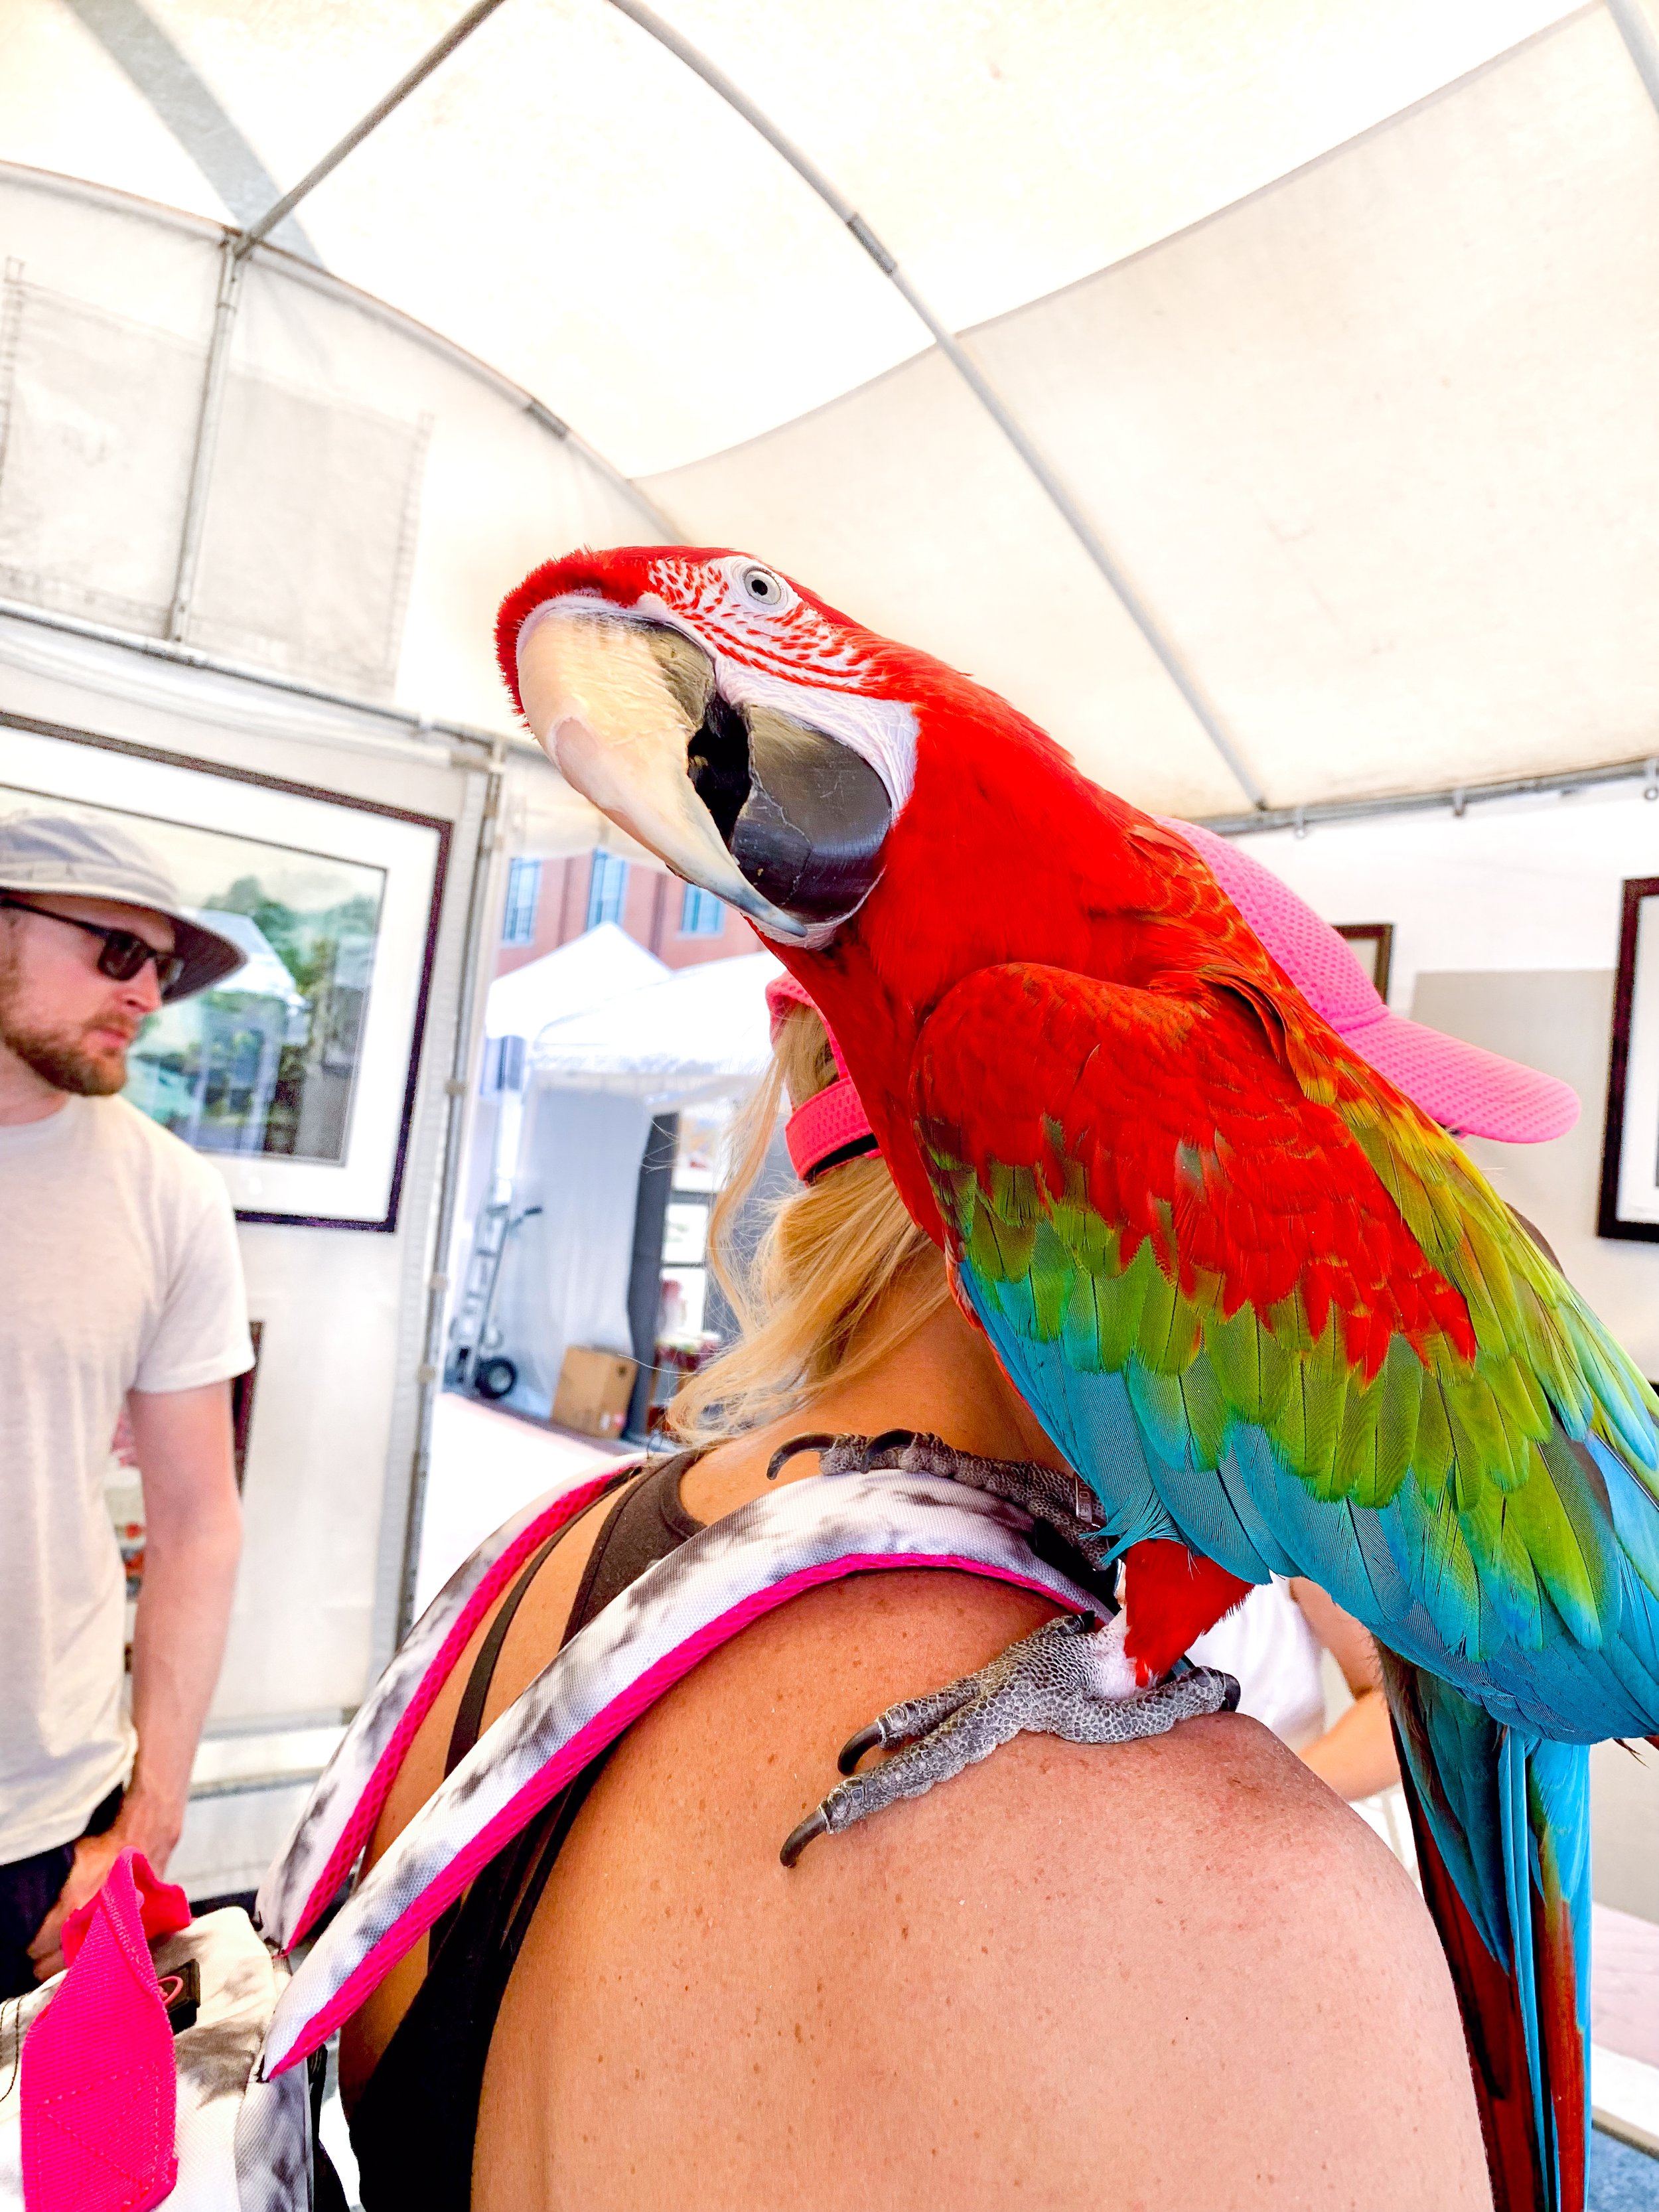 This woman's parrot came out to see what the squawk was about